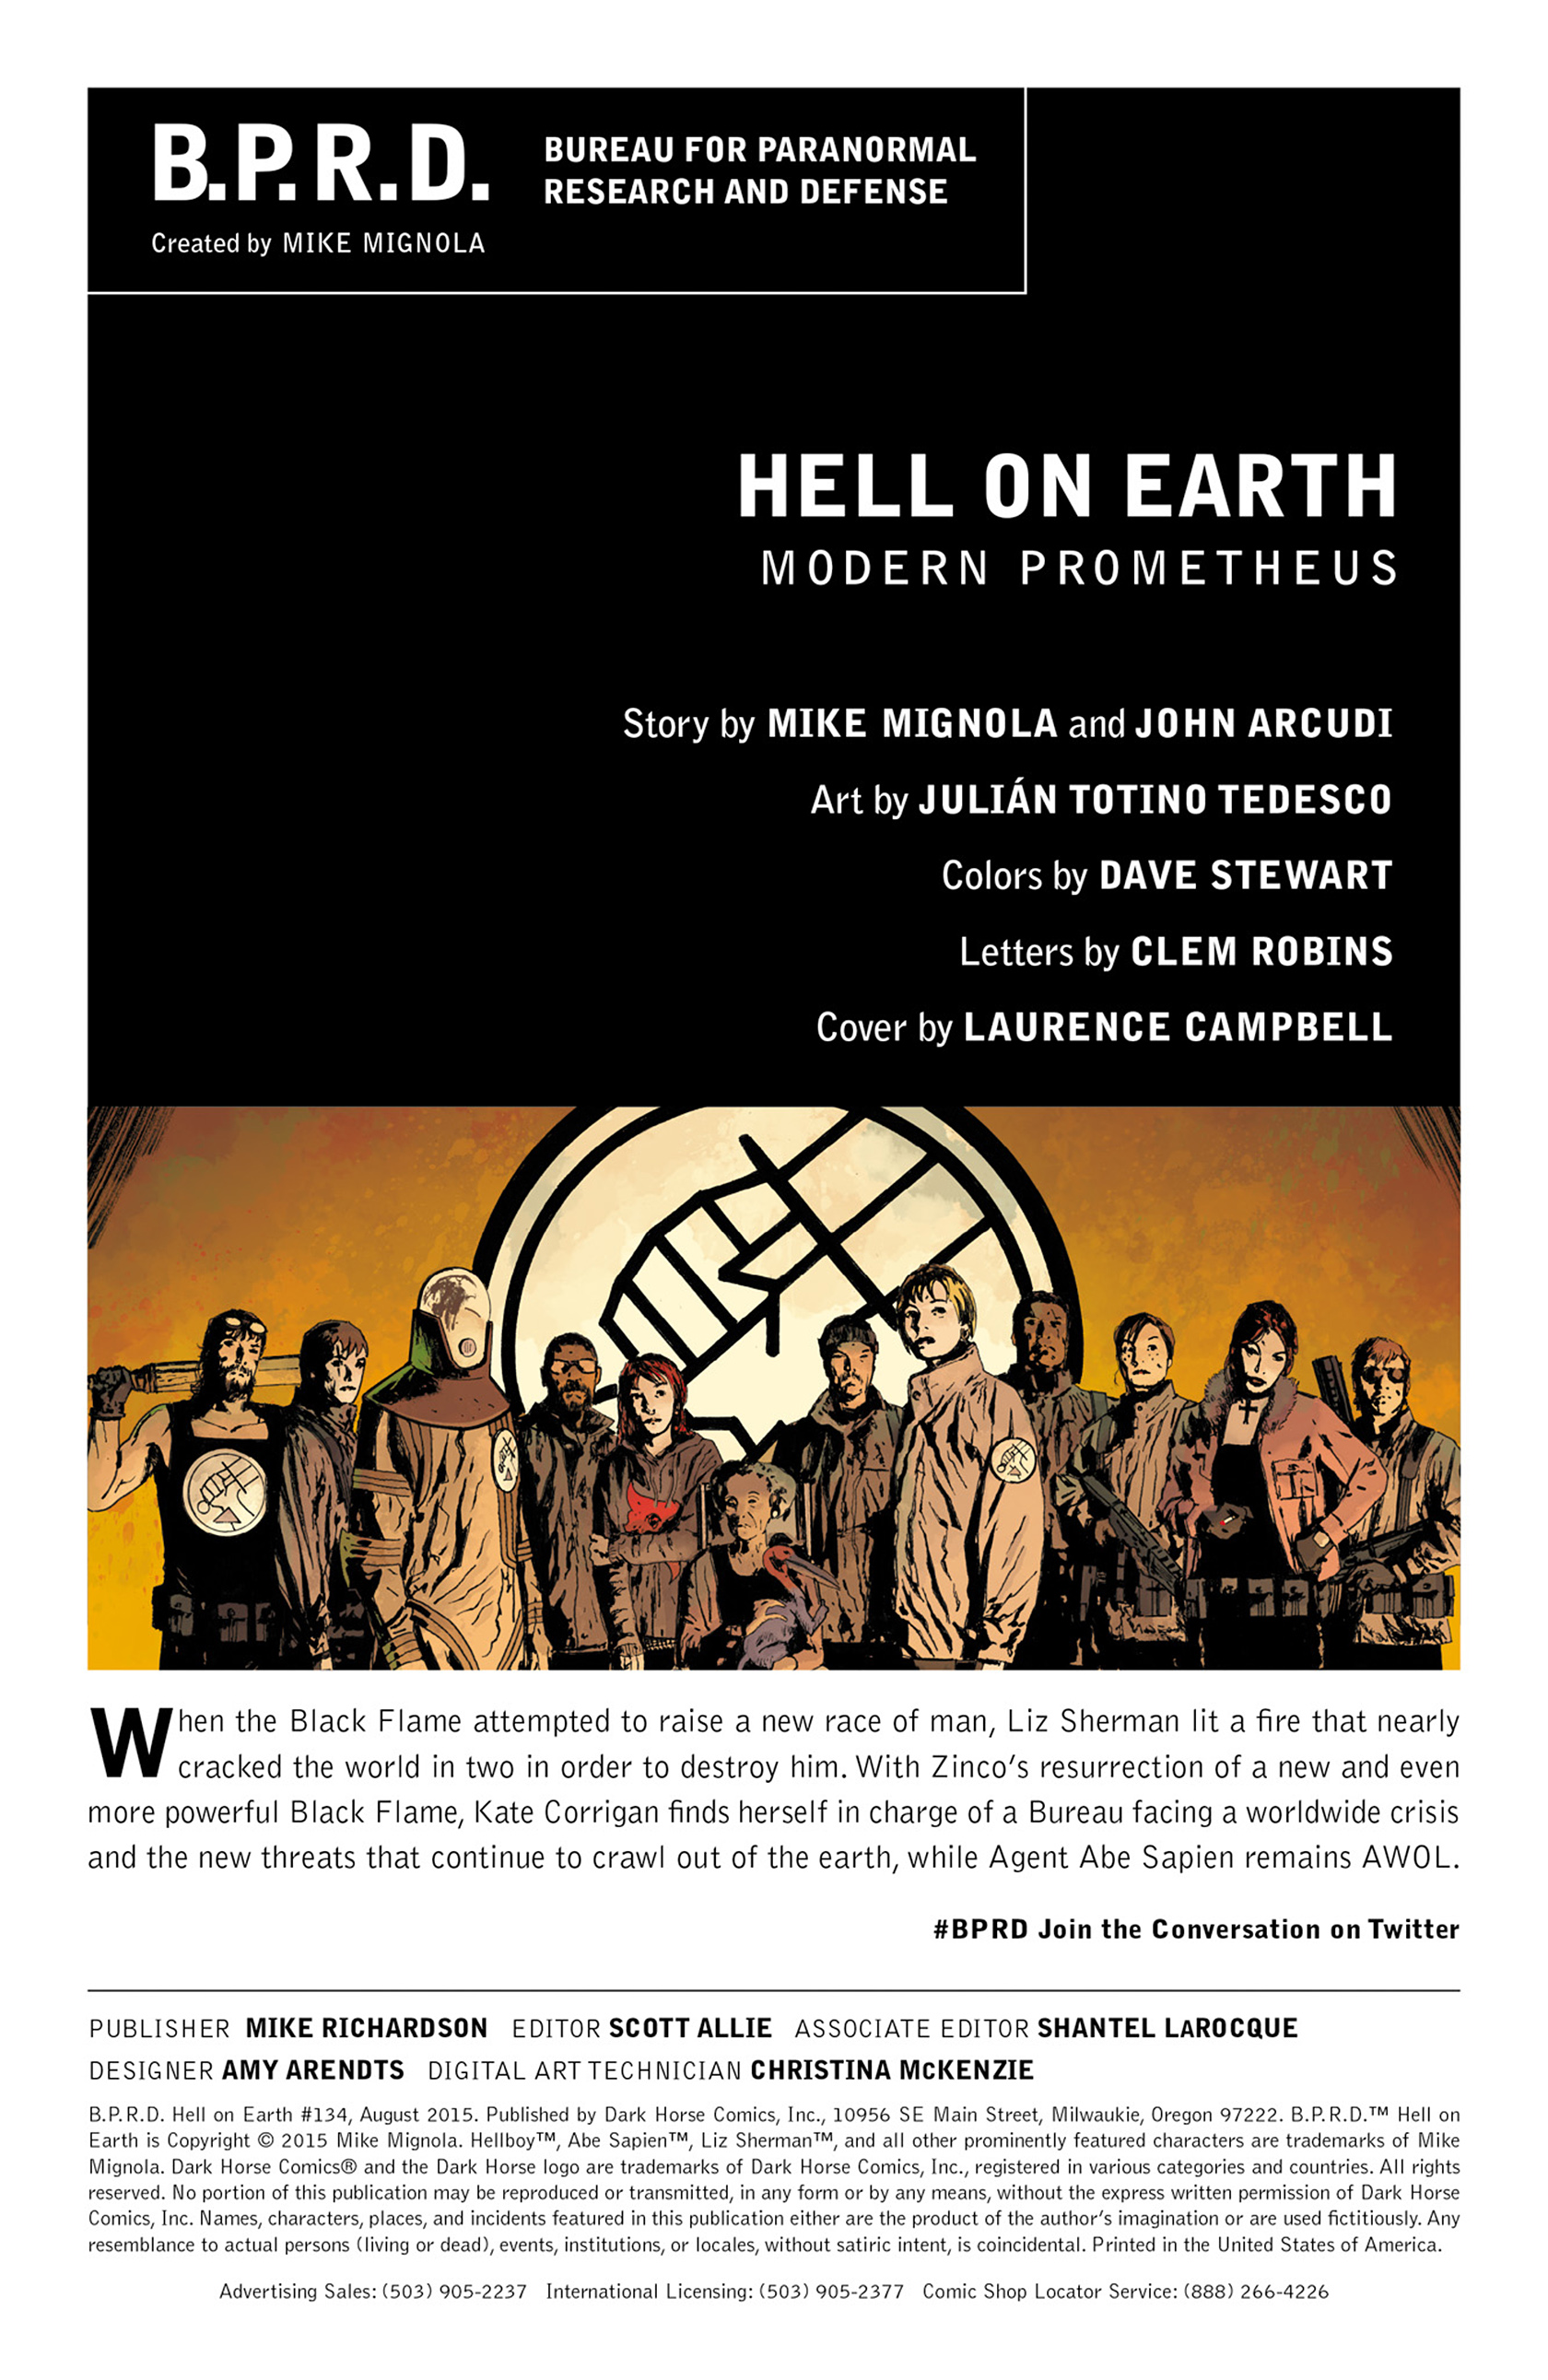 Read online B.P.R.D. Hell on Earth comic -  Issue #134 - 2